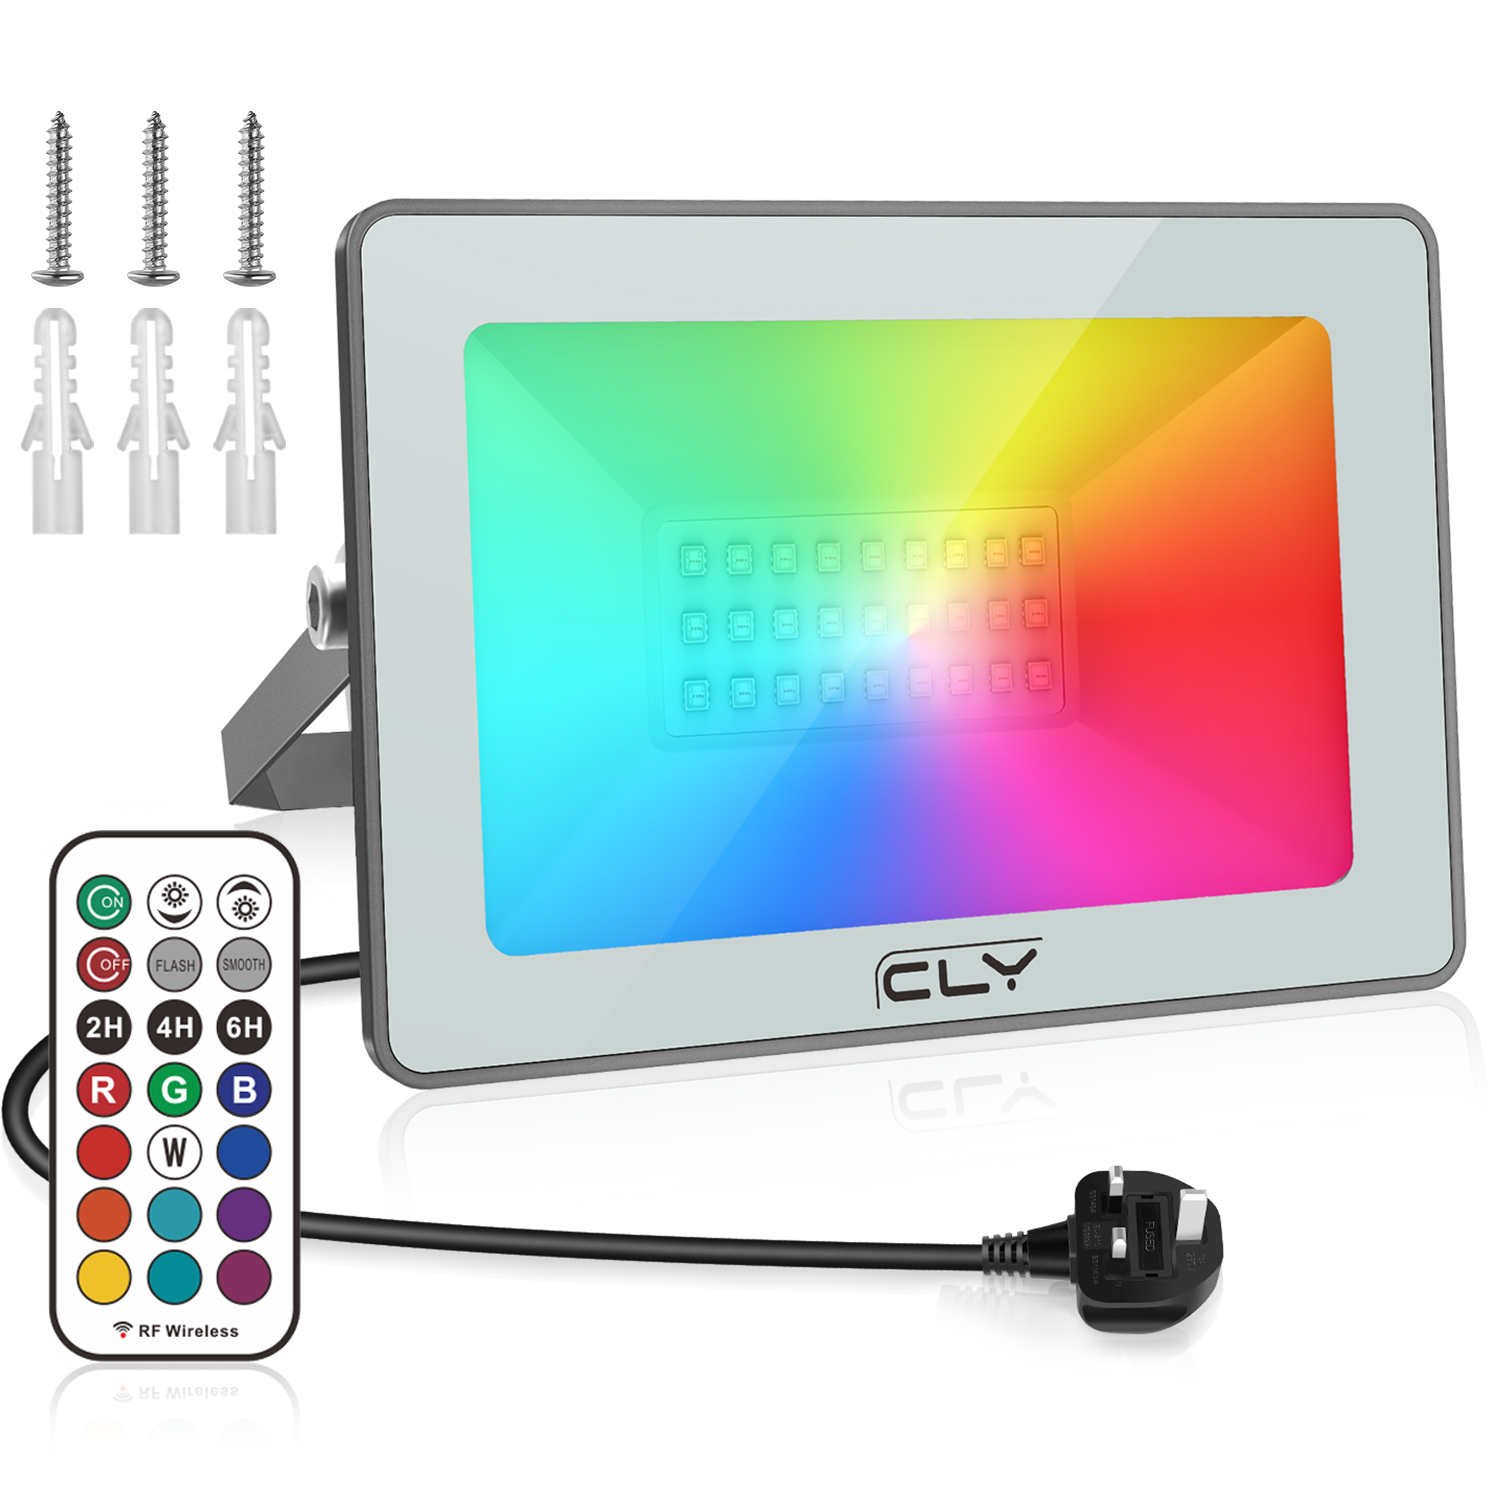 CLV 25W LED RGB Floodlight, Outdoor/Indoor Colour Changing Flood Lights with Remote Control, Memory Timing Function IP66 Waterproof Flood Light, Decoration for Stage Landscape Garden Party Pond,Grey